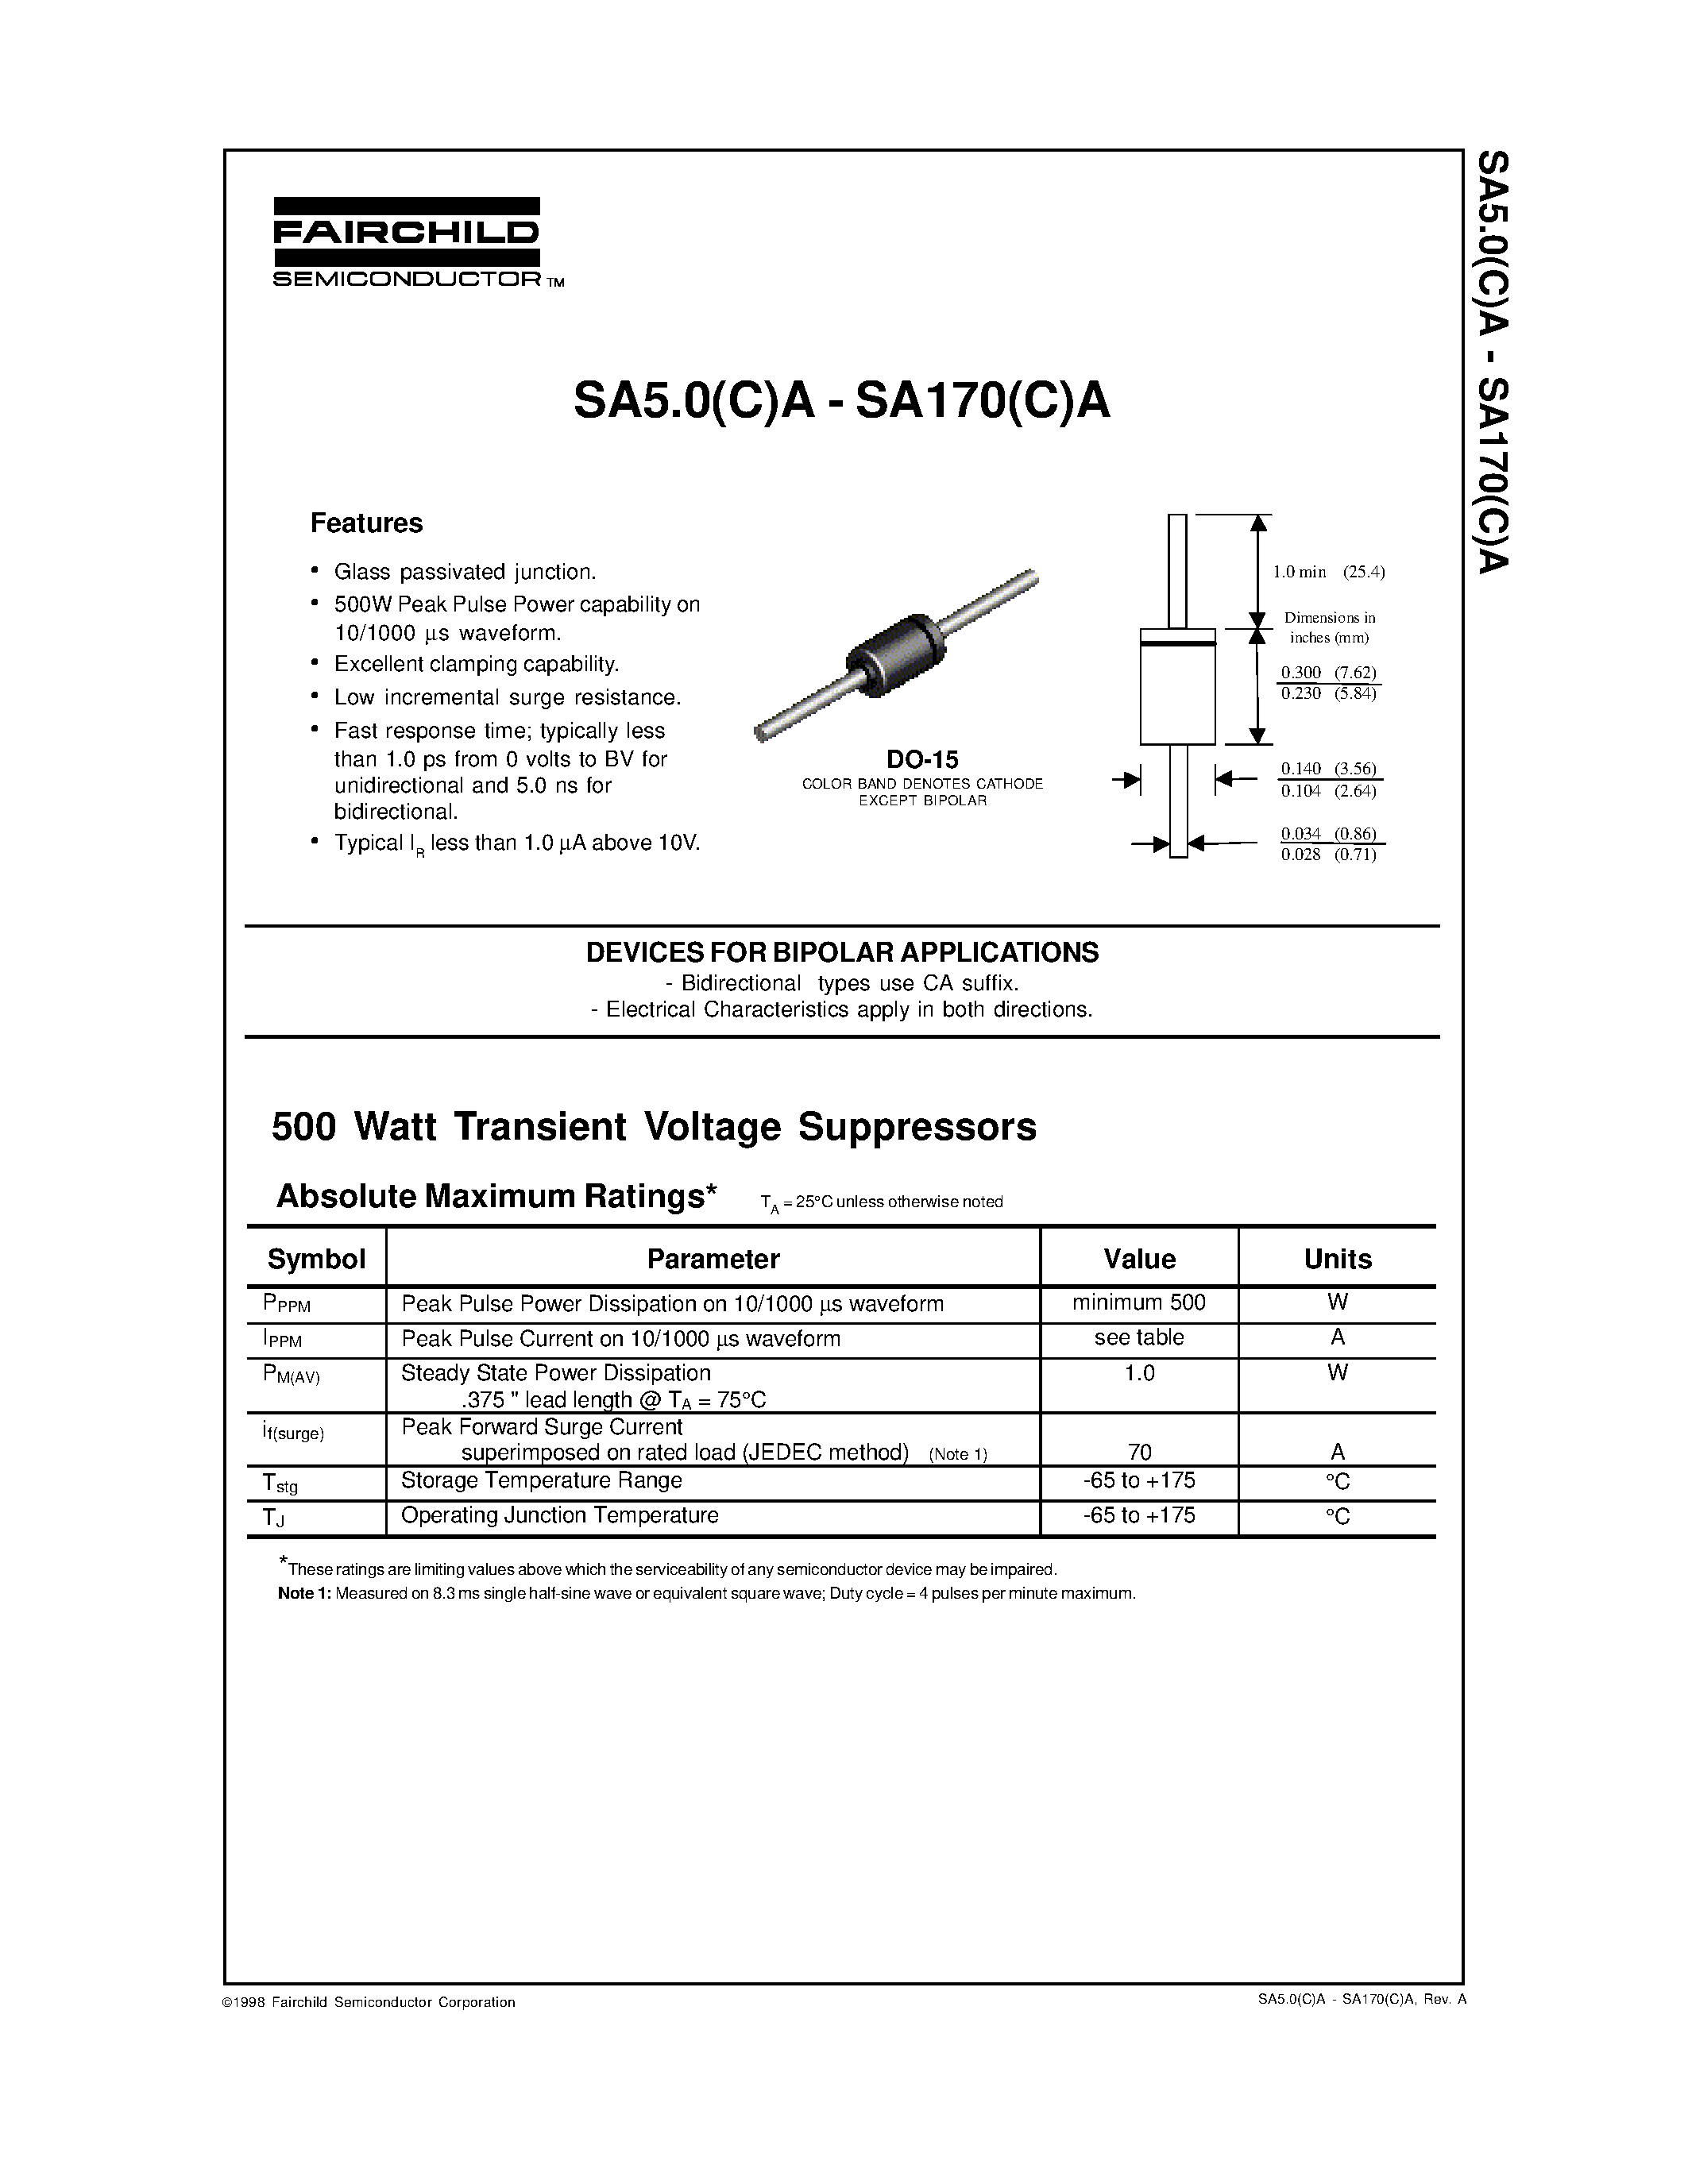 Datasheet SA100(C)A - DEVICES FOR BIPOLAR APPLICATIONS page 1